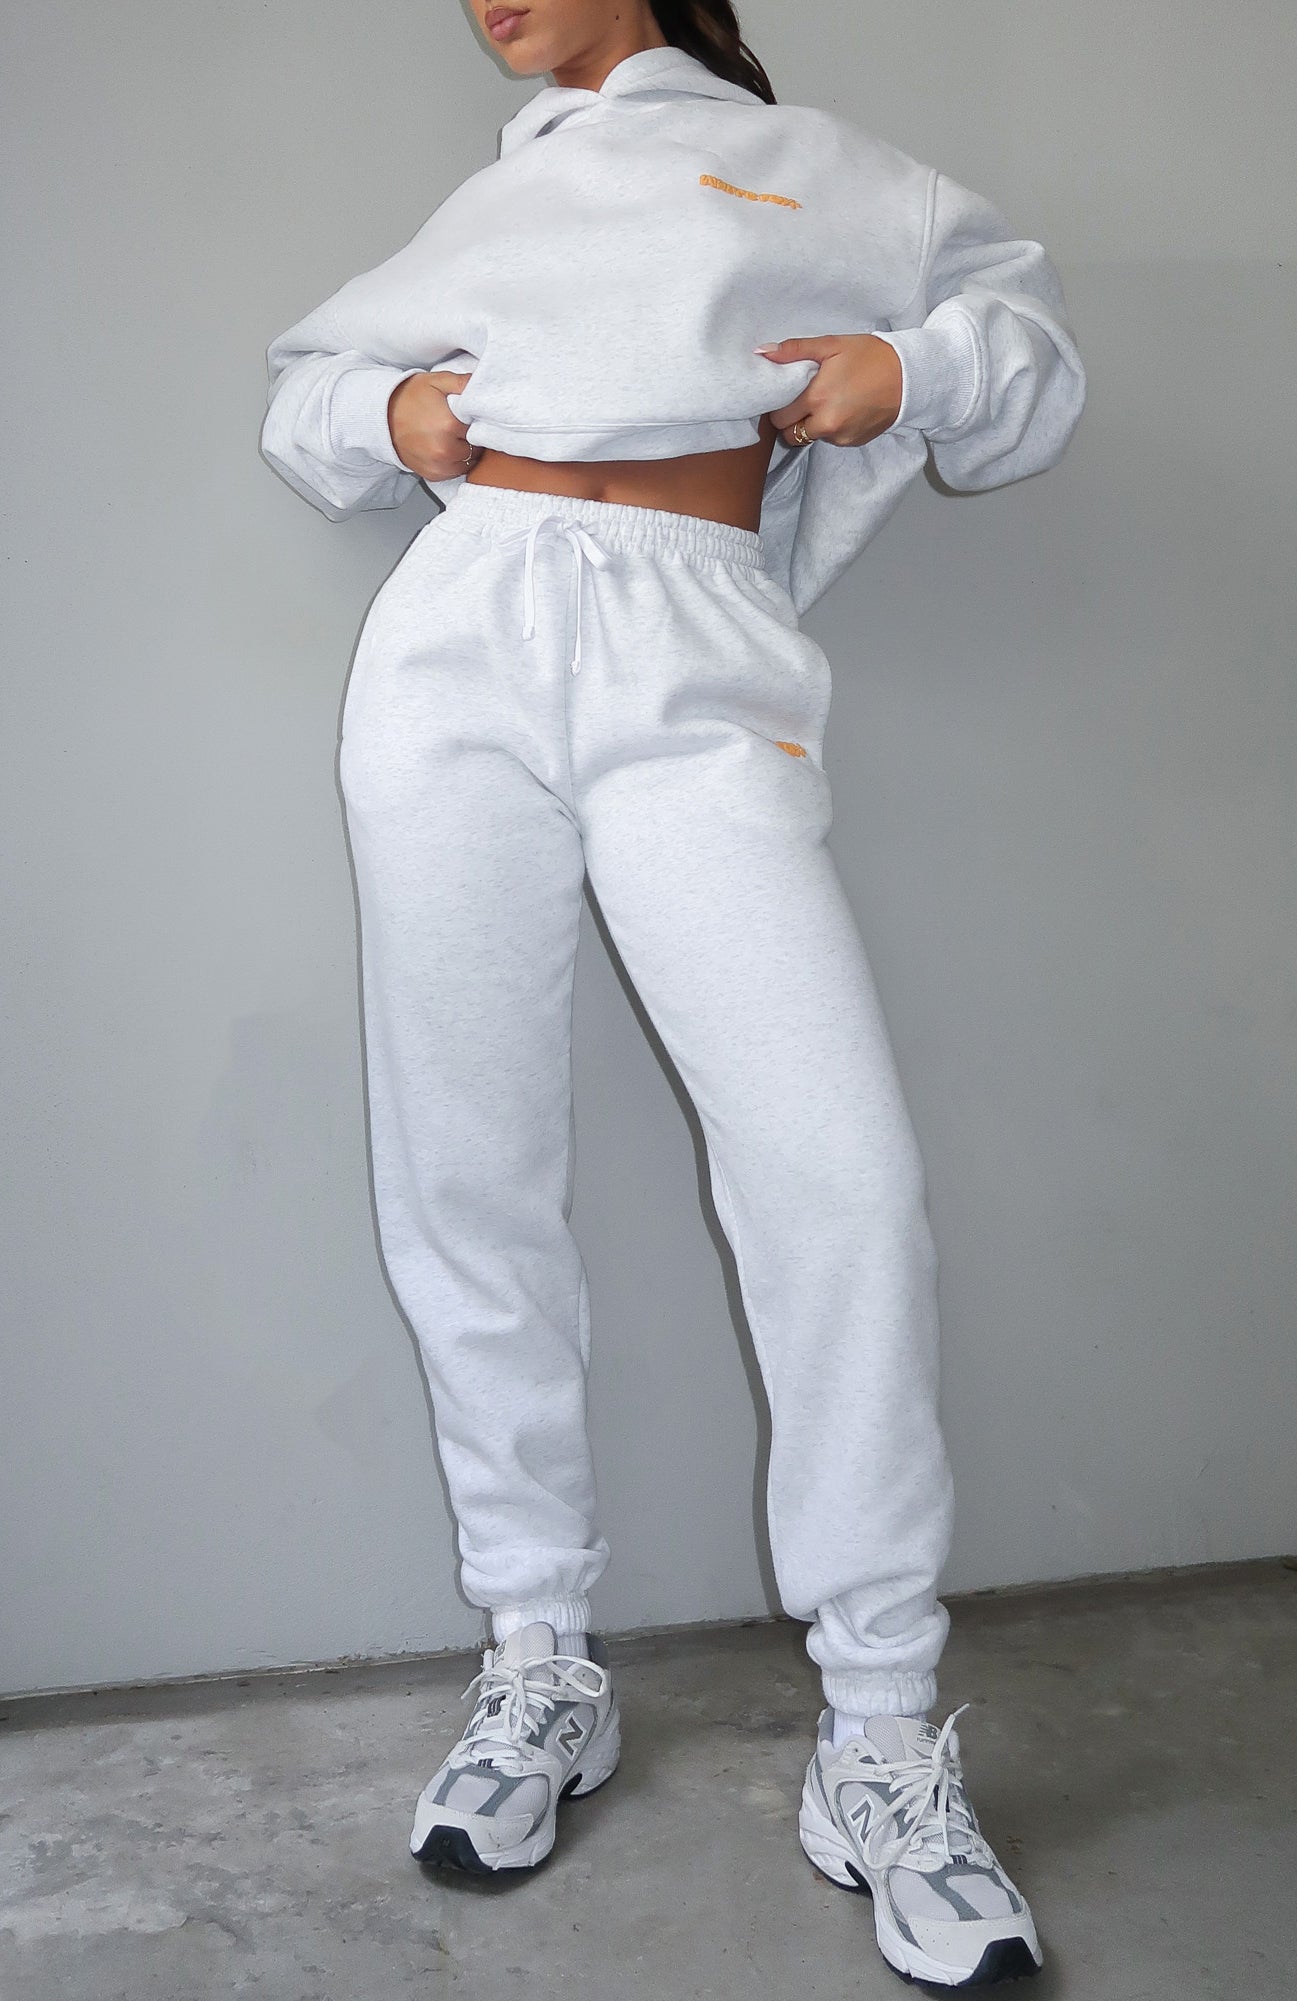 Stick With Me Wide Leg Sweatpants Grey Marle